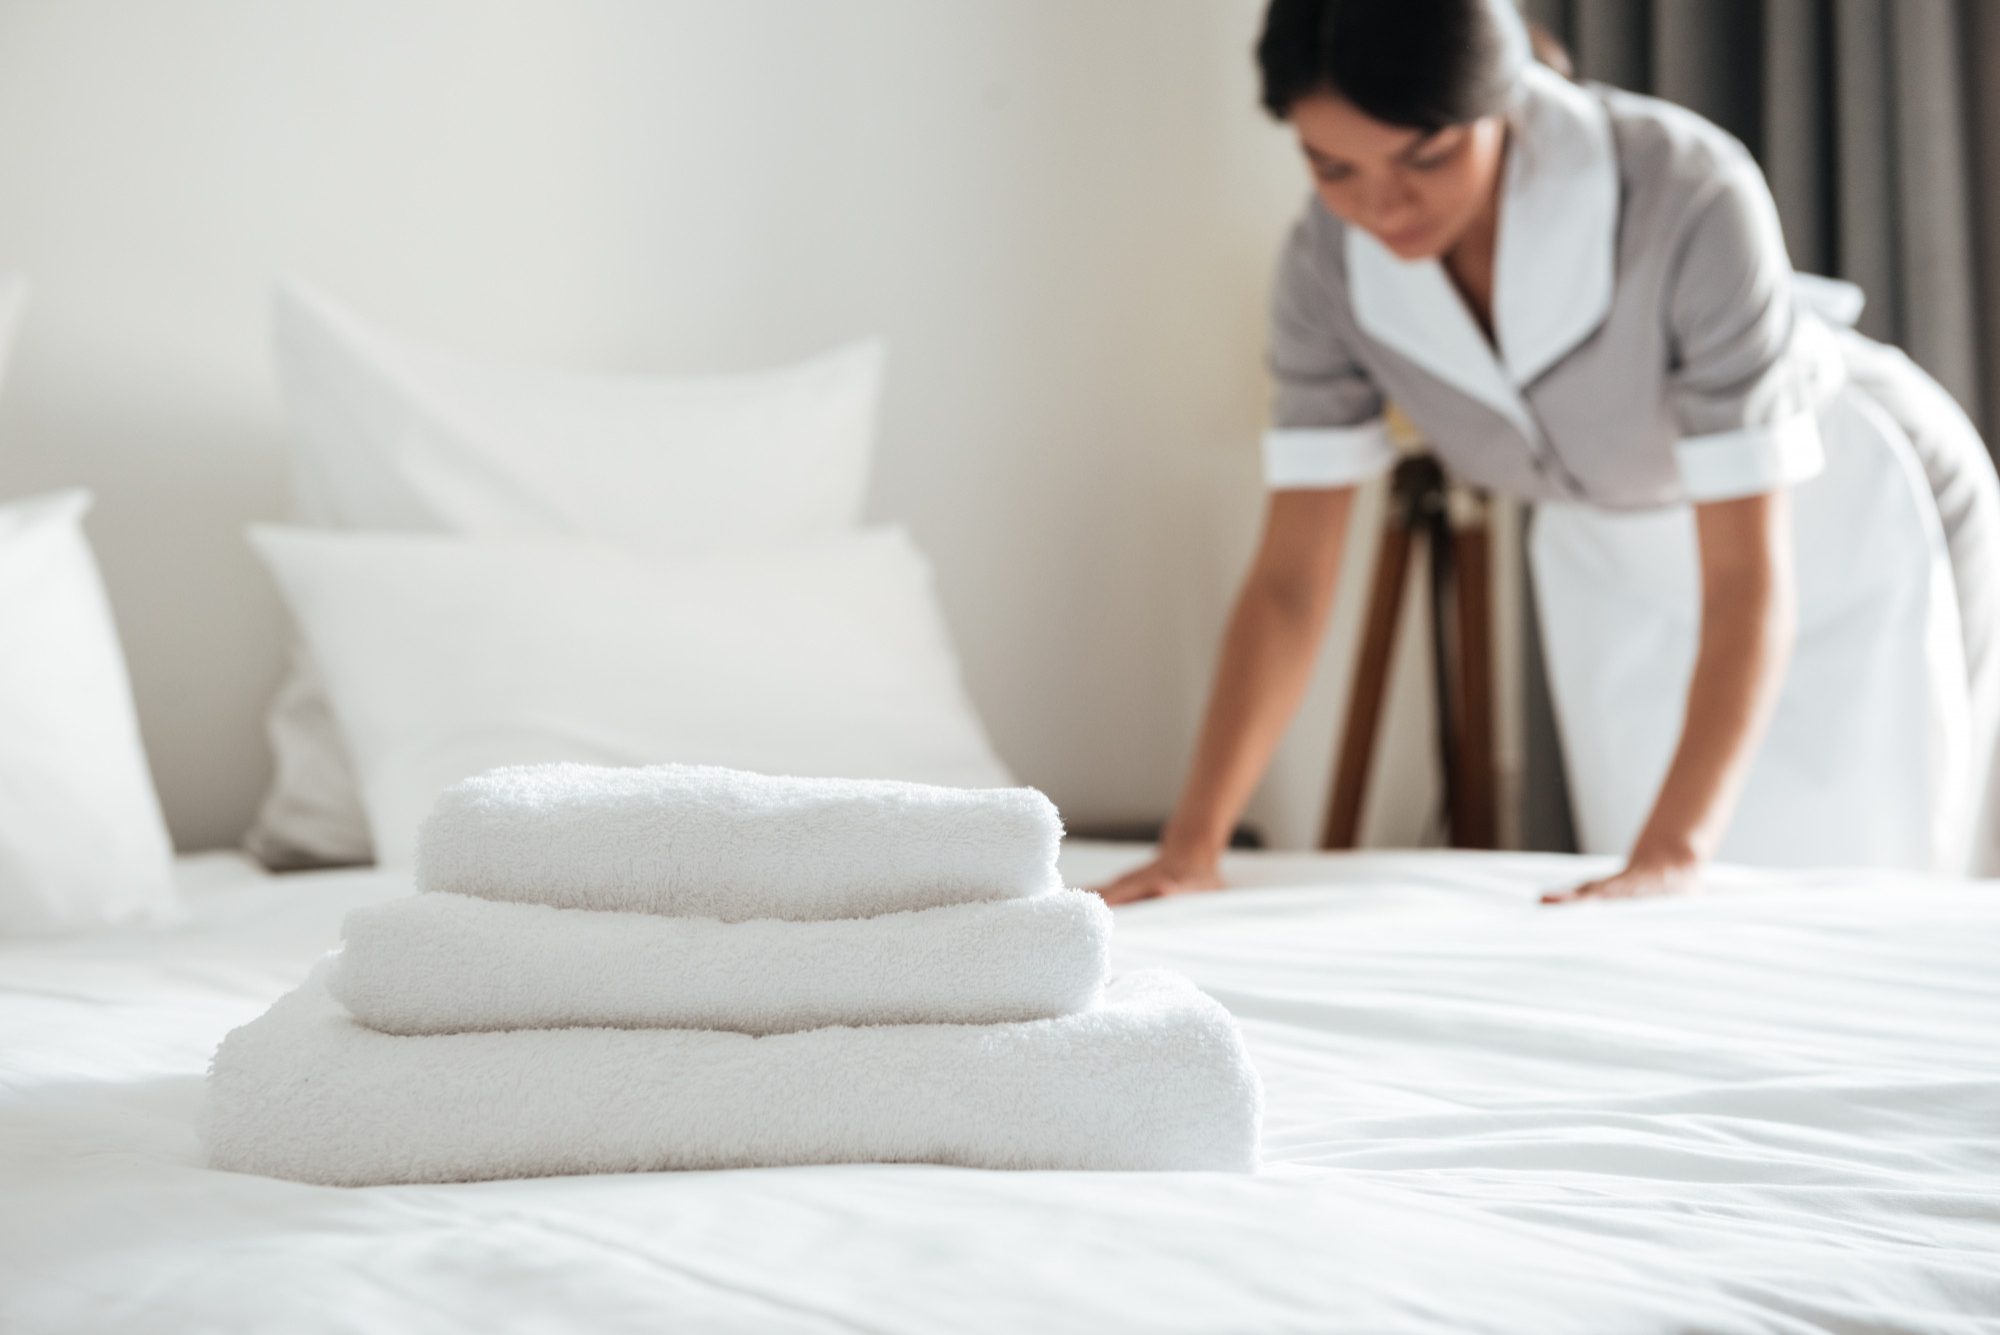 Efficient Maid Cleaning Services: Guaranteed!